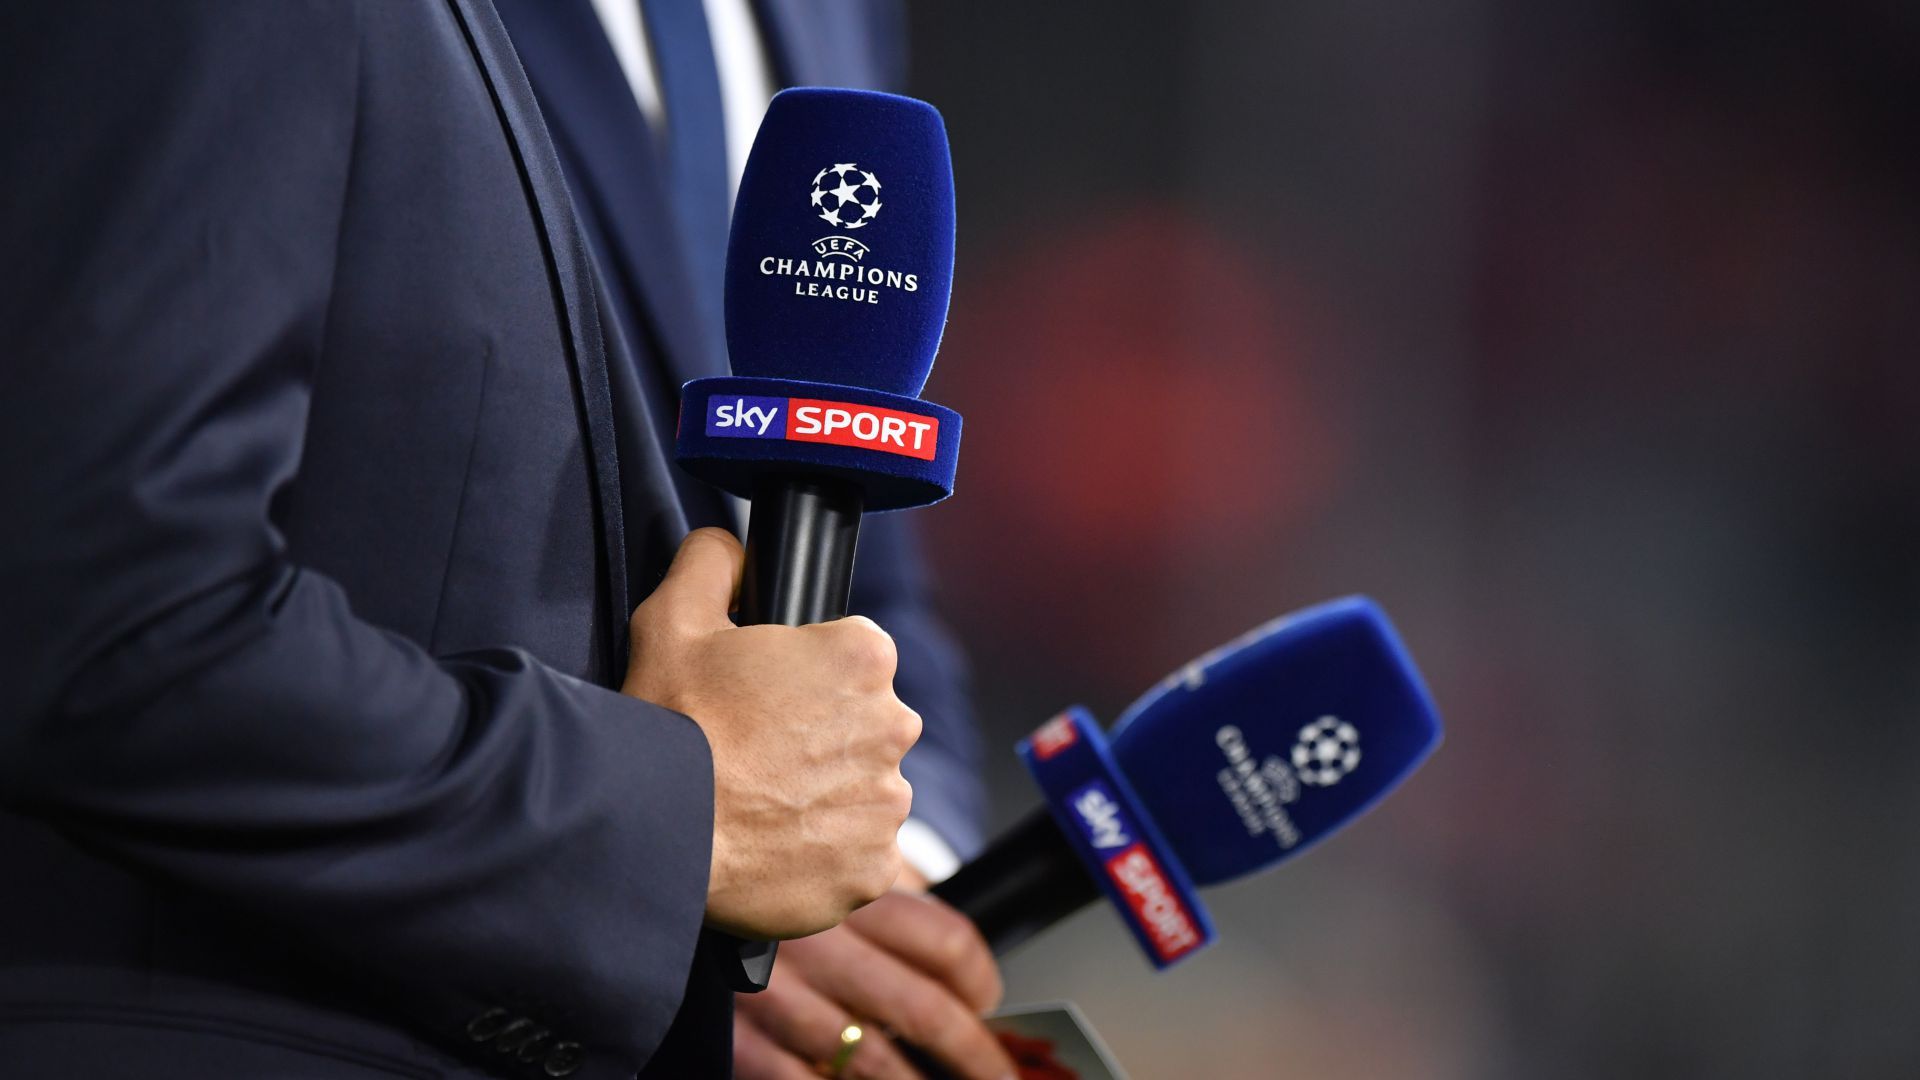 Sky Sport, Champions League 2022/23, Round of 16 #2, Commentary Schedule NOW